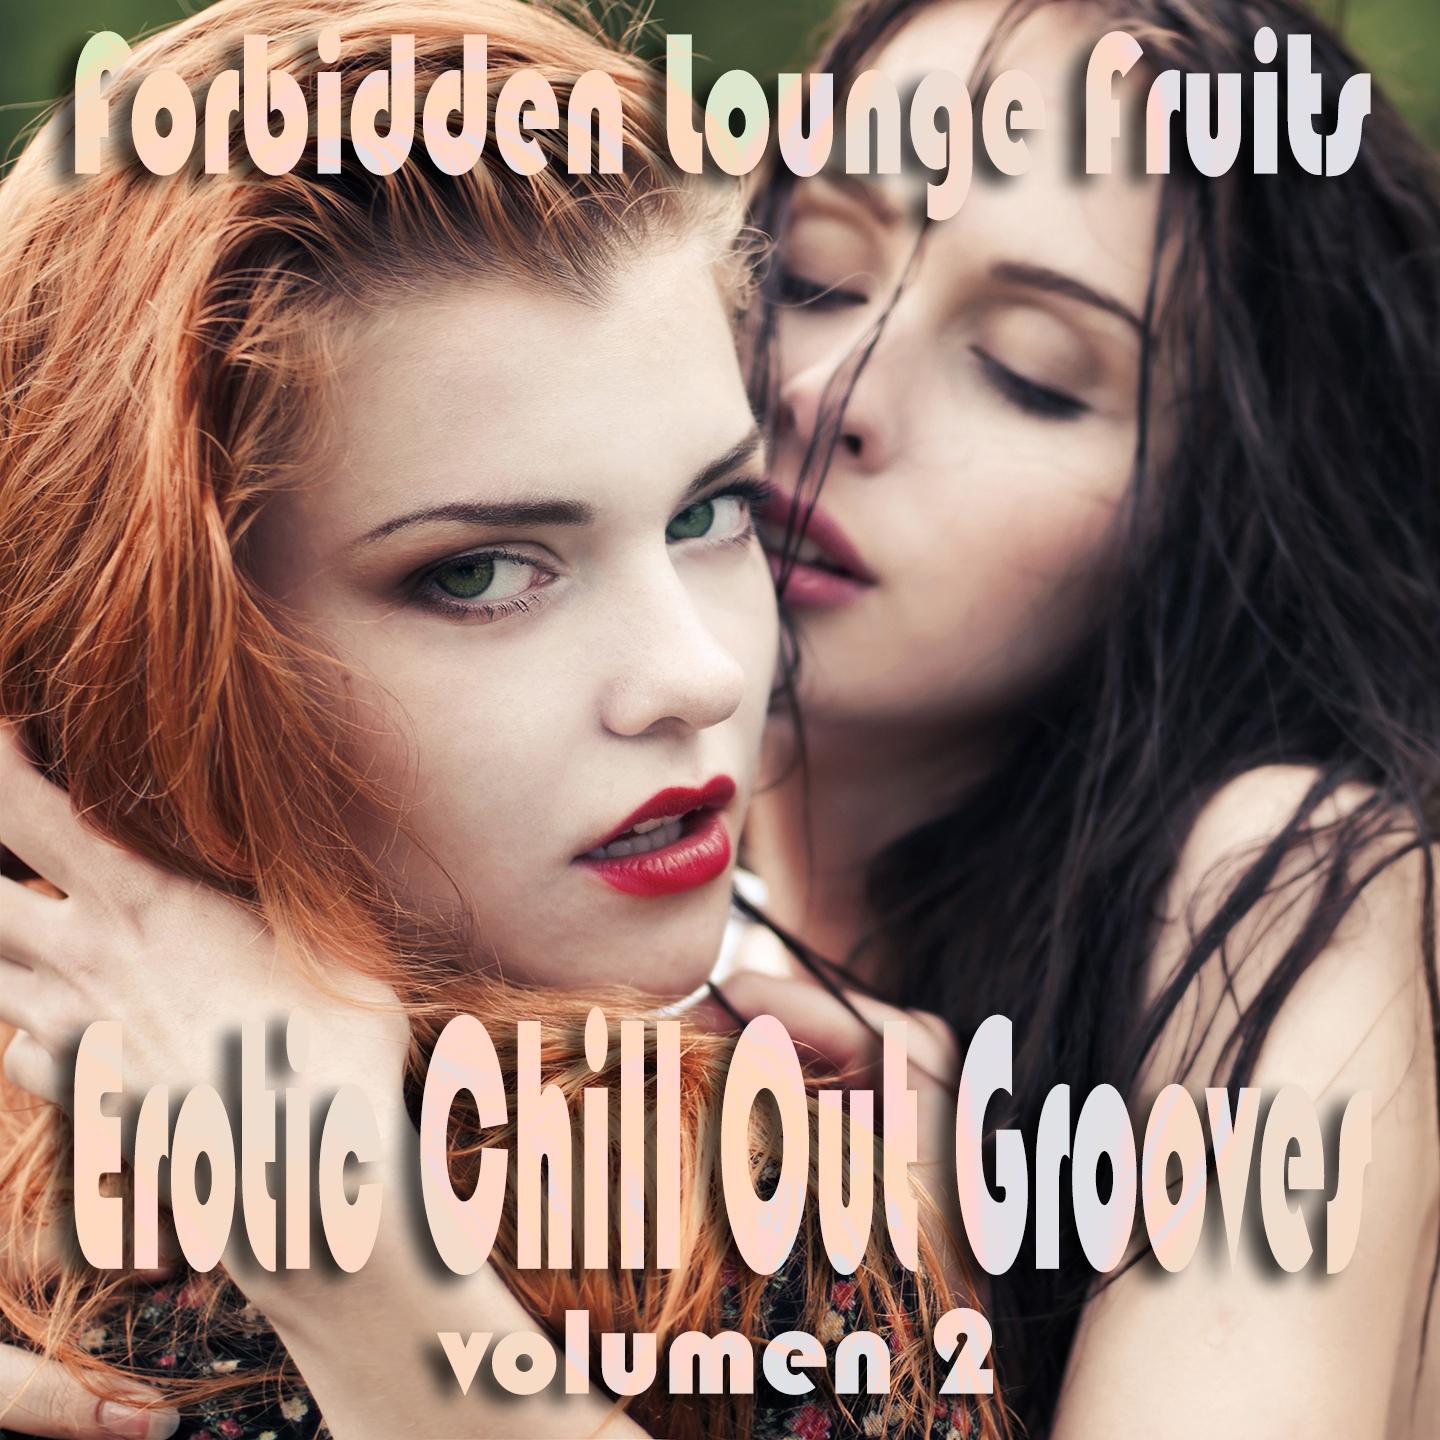 Forbidden Lounge Fruits & Erotic Chill Out Grooves, Vol. 2 (Sensual and Sensitive Adult Music)